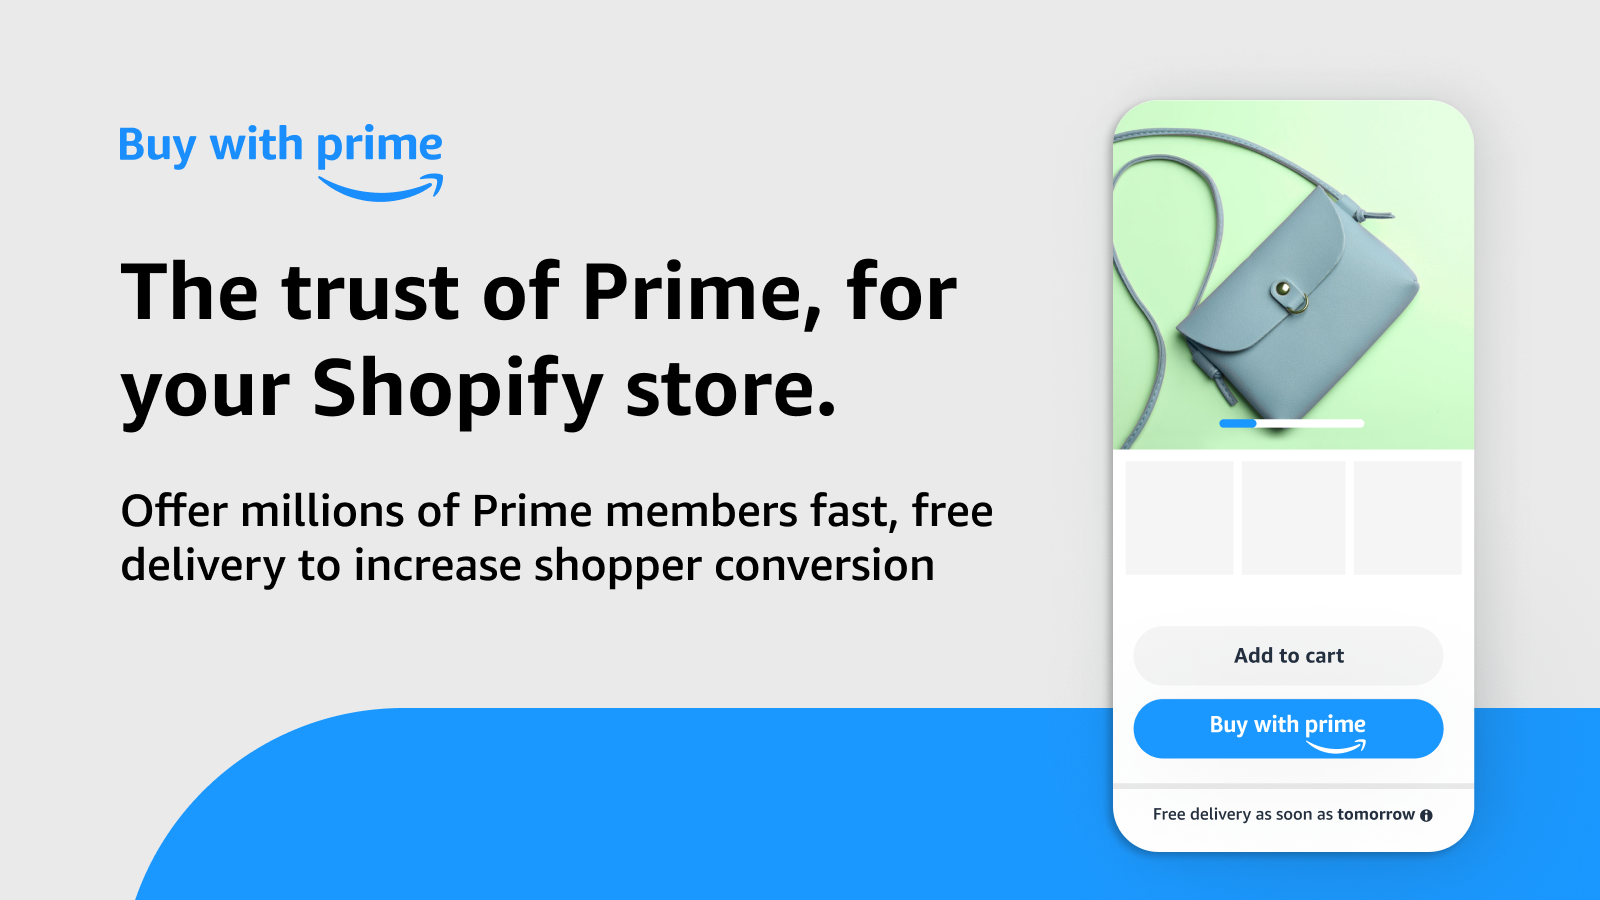 The Buy with Prime app, the trust of Prime on your Shopify store